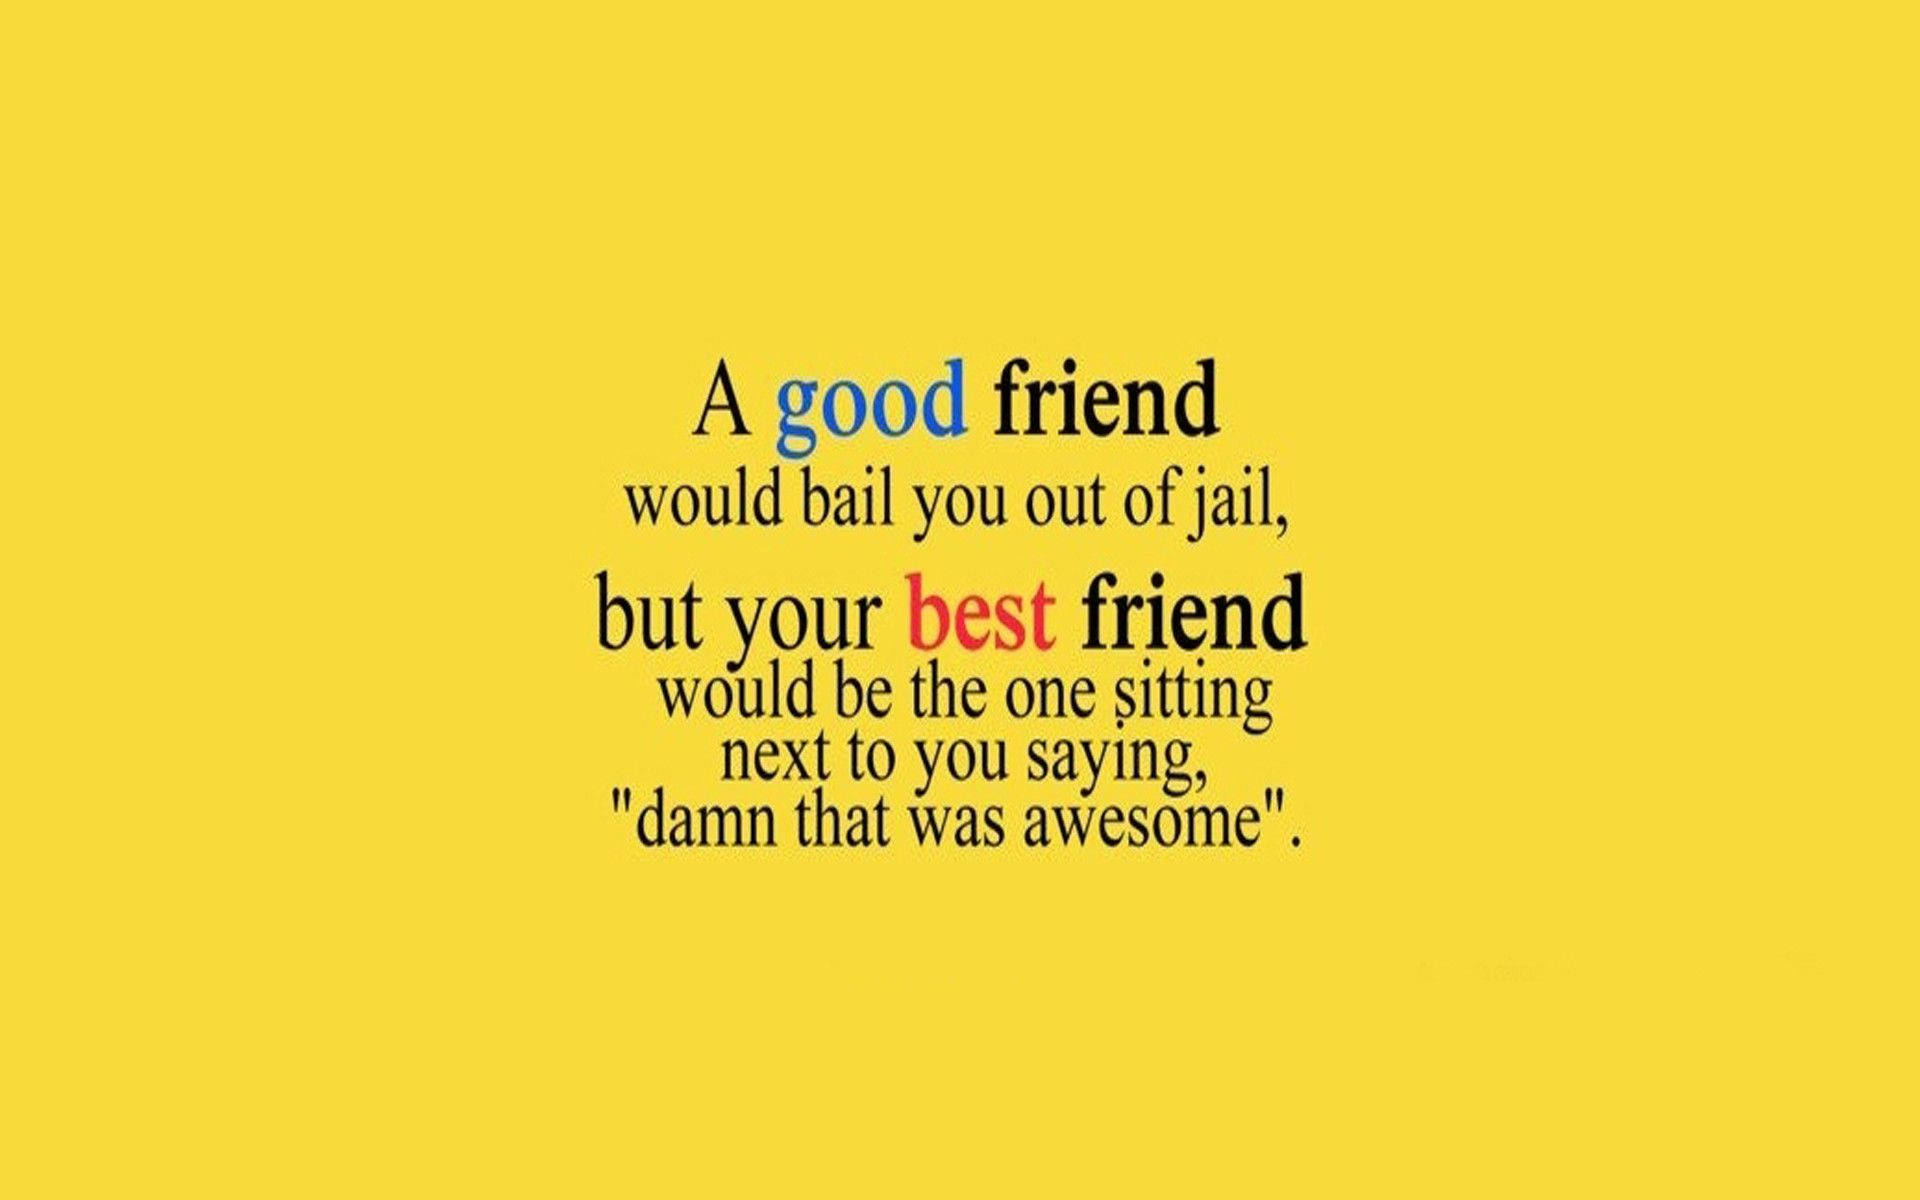 Best Friend Quote In Yellow